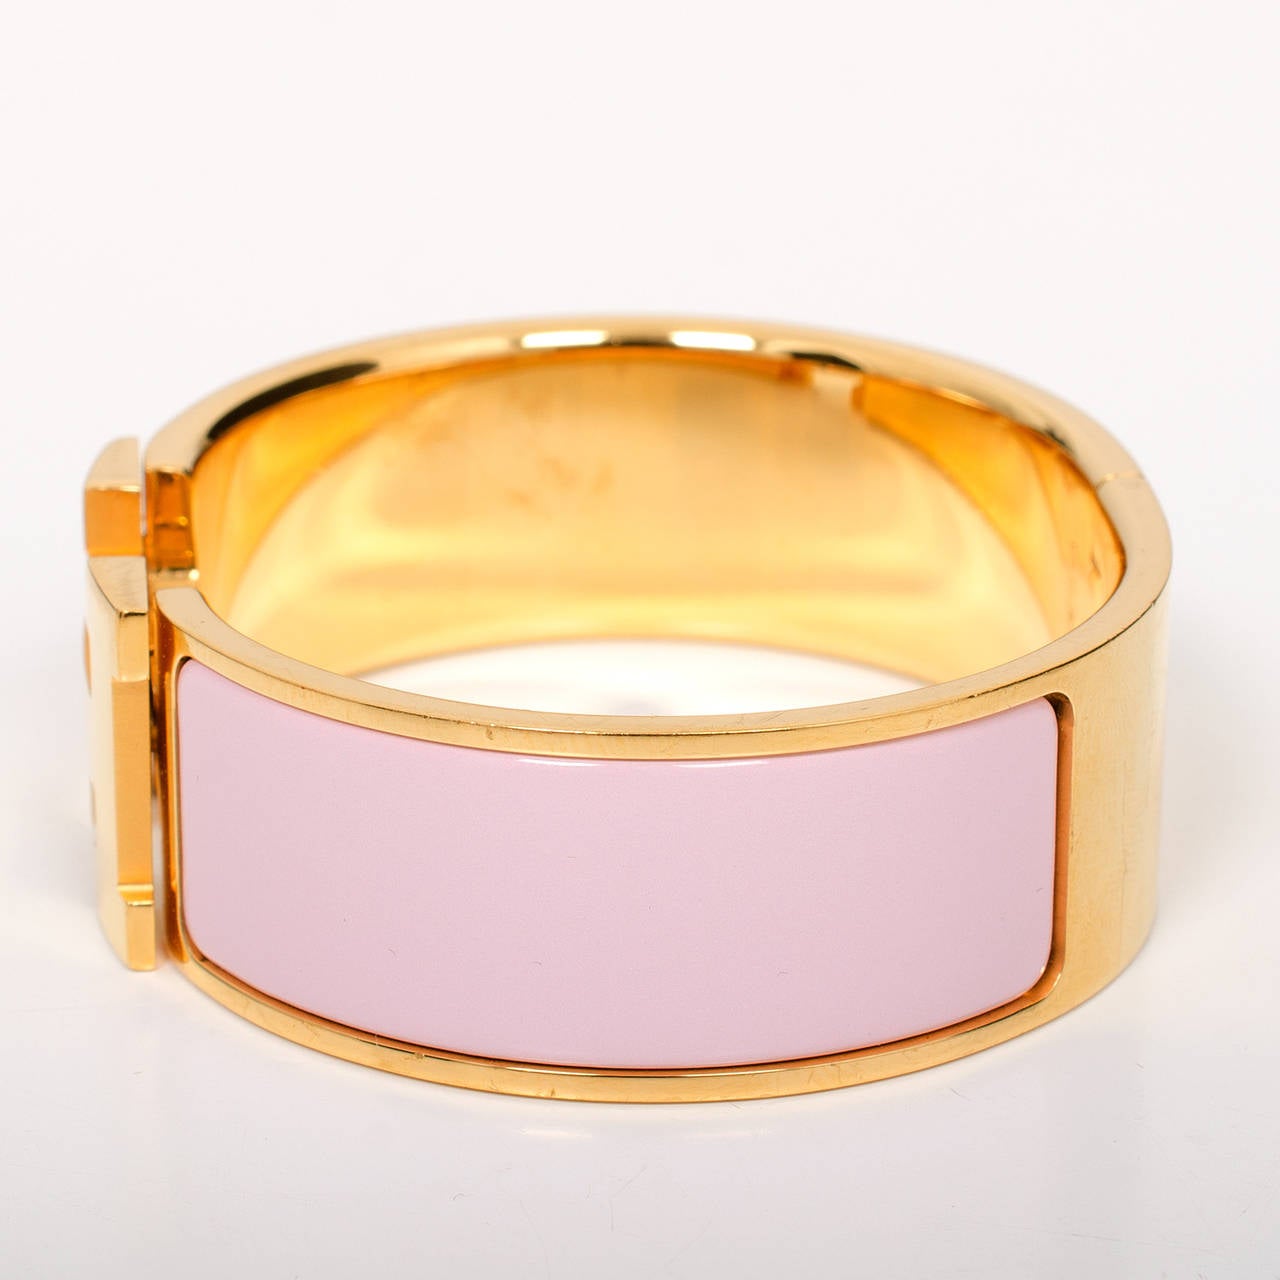 Hermes wide Clic Clac H bracelet in Rose Dragee (pink) enamel with gold plated hardware in size PM.

Origin: France

Condition: Excellent - minor scratches on hardware; no wear on enamel

Accompanied by: Hermes box

Measurements: Diameter: